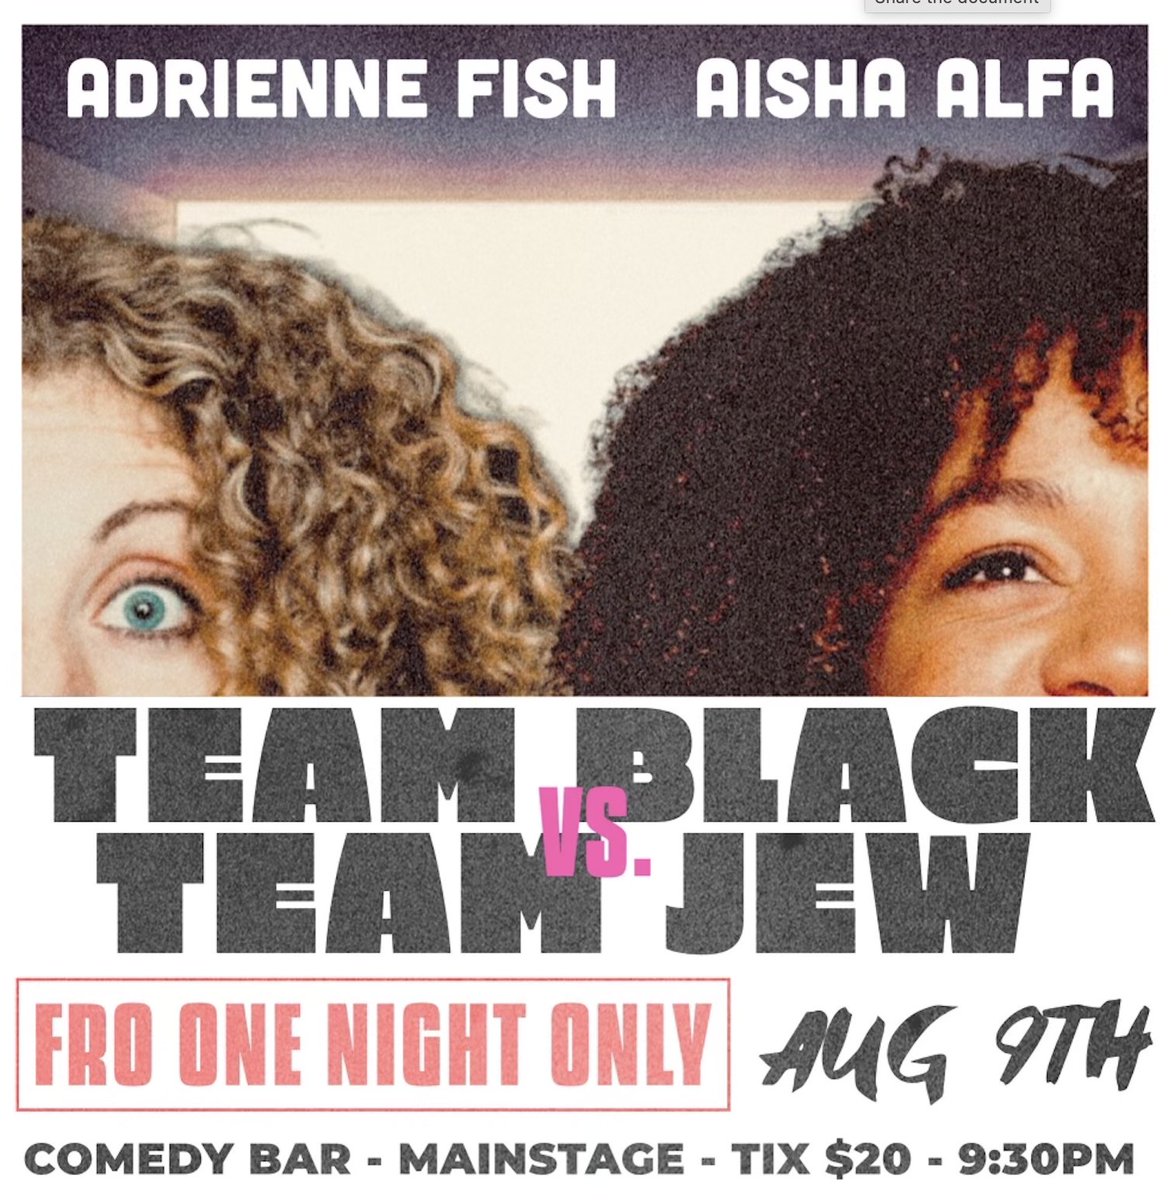 It's happening!!! I'll be in #Toronto for a few nights and I get to throw a stand up comedy party with @adrienne_fish at @comedybar AUG 9th @ 9:30! Come have all the fun in the entire world ever!!! Get tix now before it's sold out: comedybar.ca/shows/fro-one-…